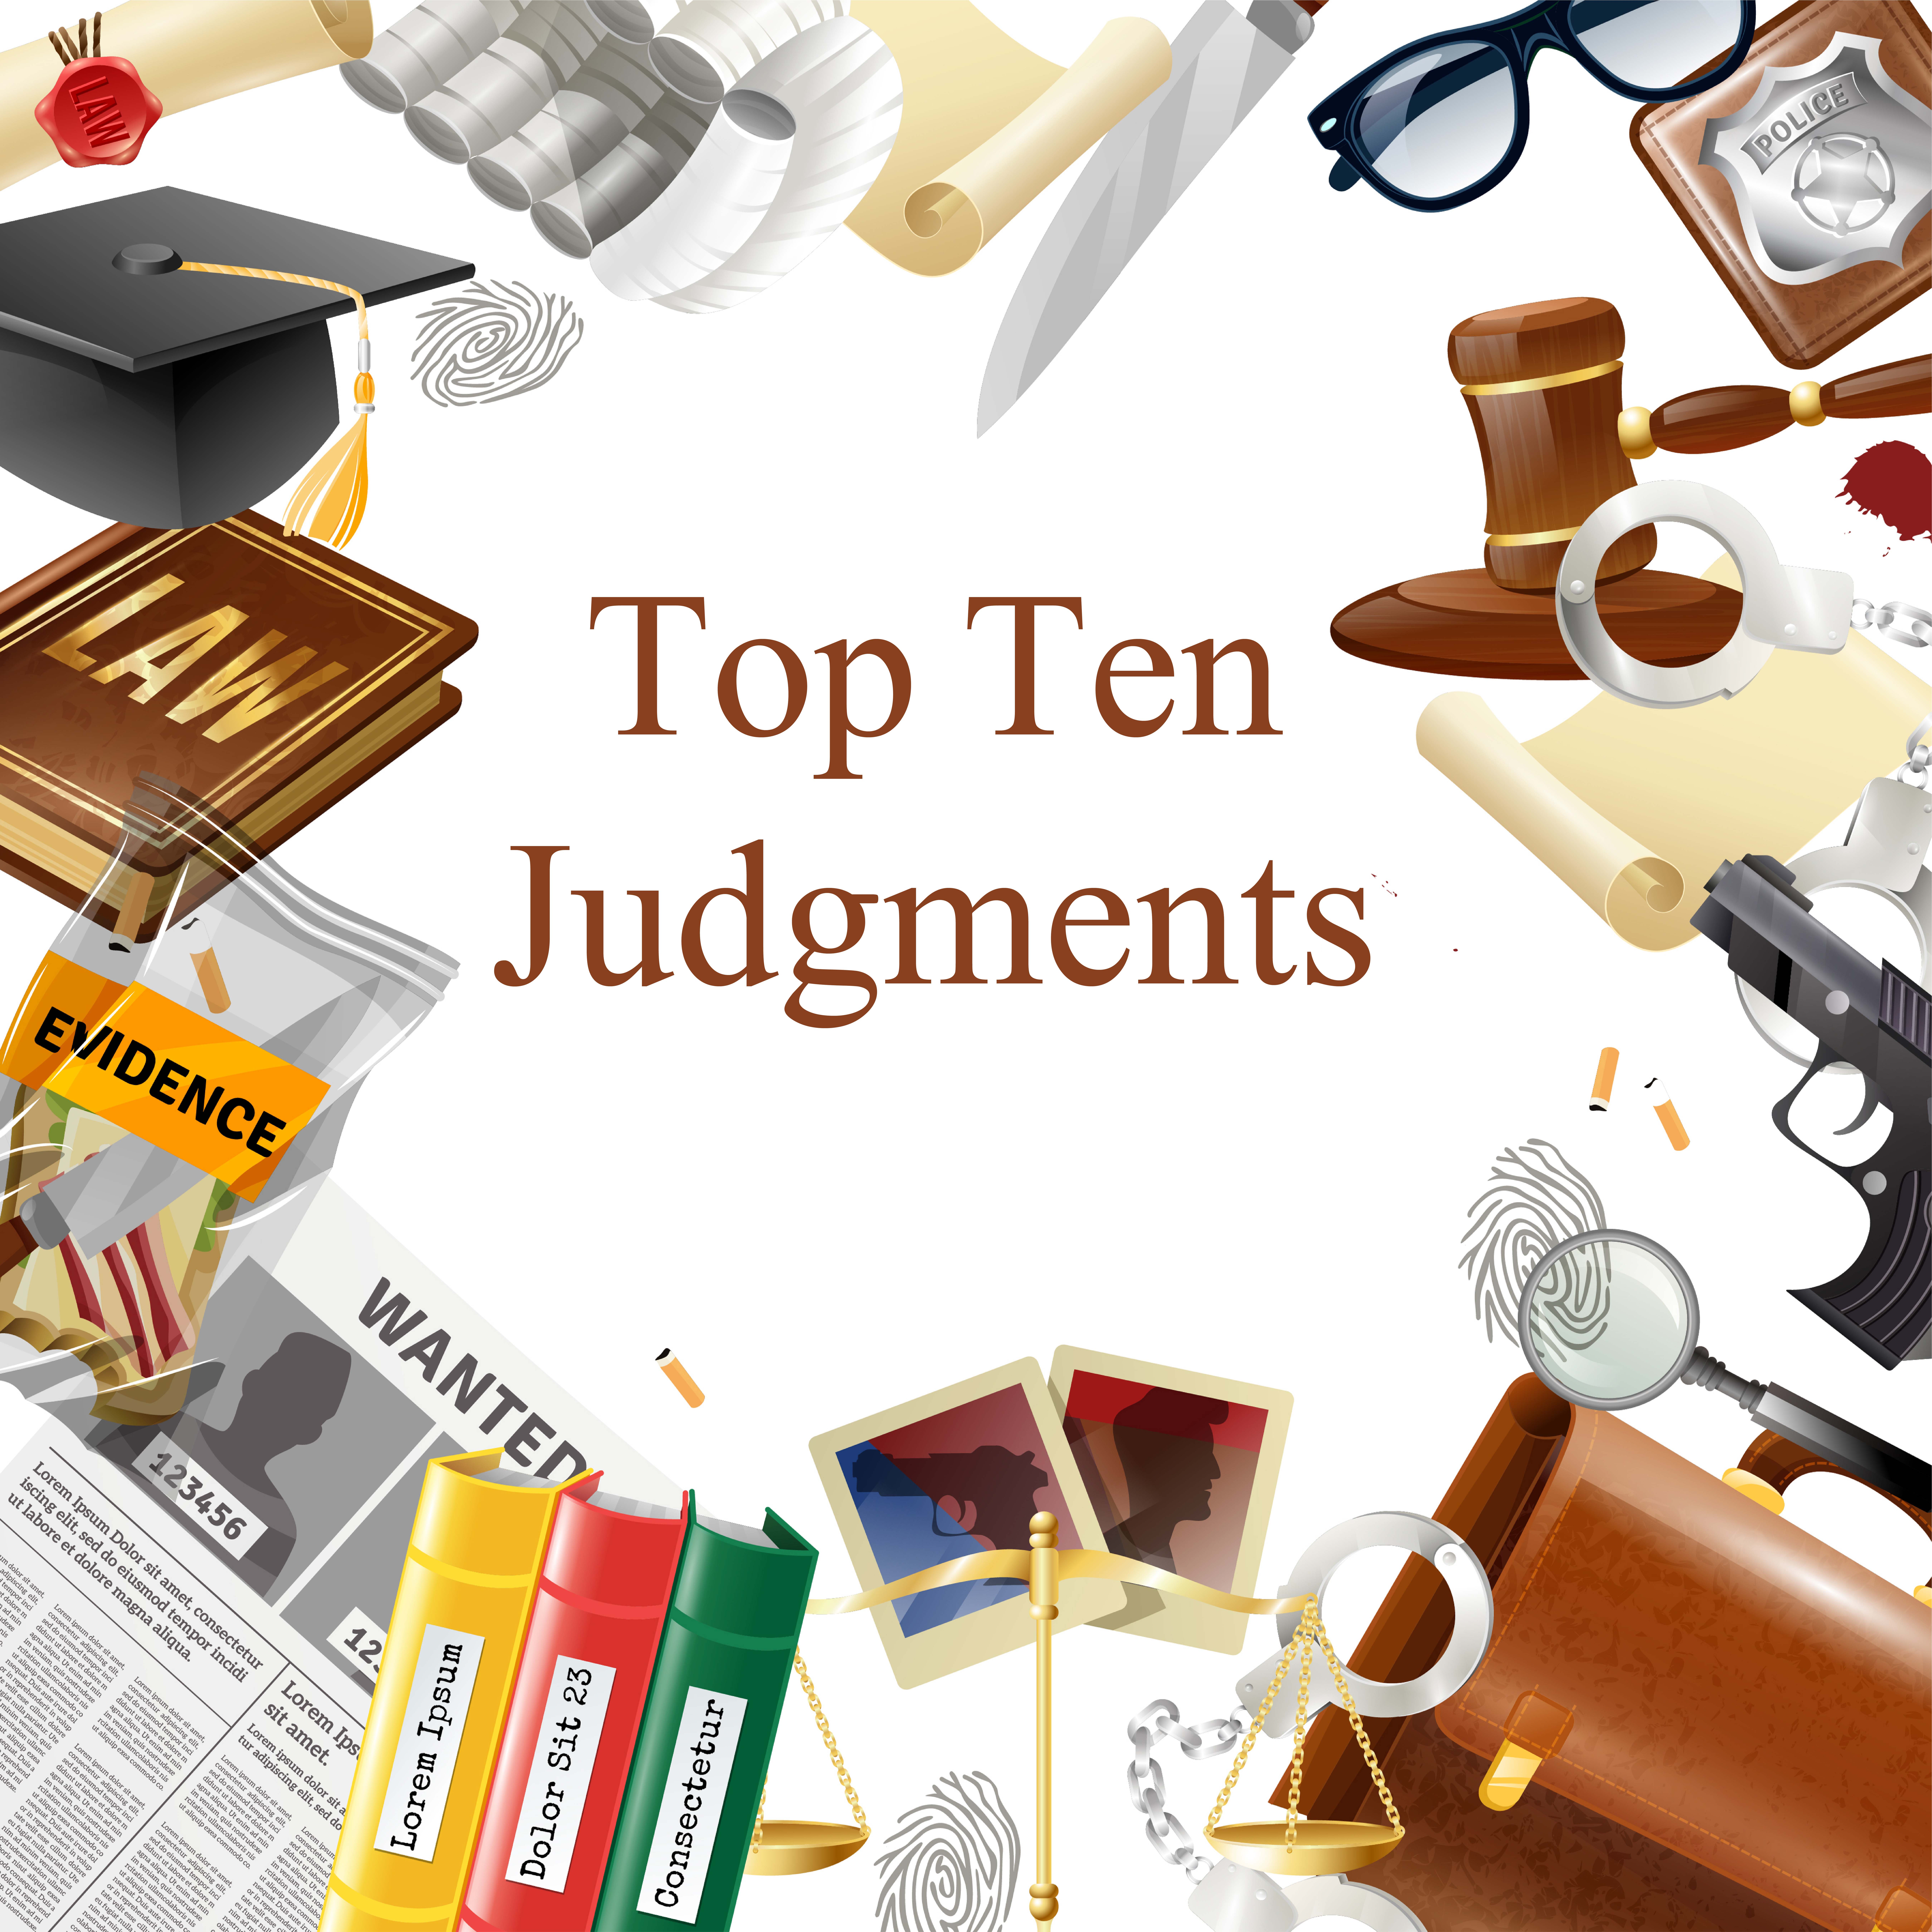 3rd National Judgment Writing Competition 2019: Top Ten Judgments